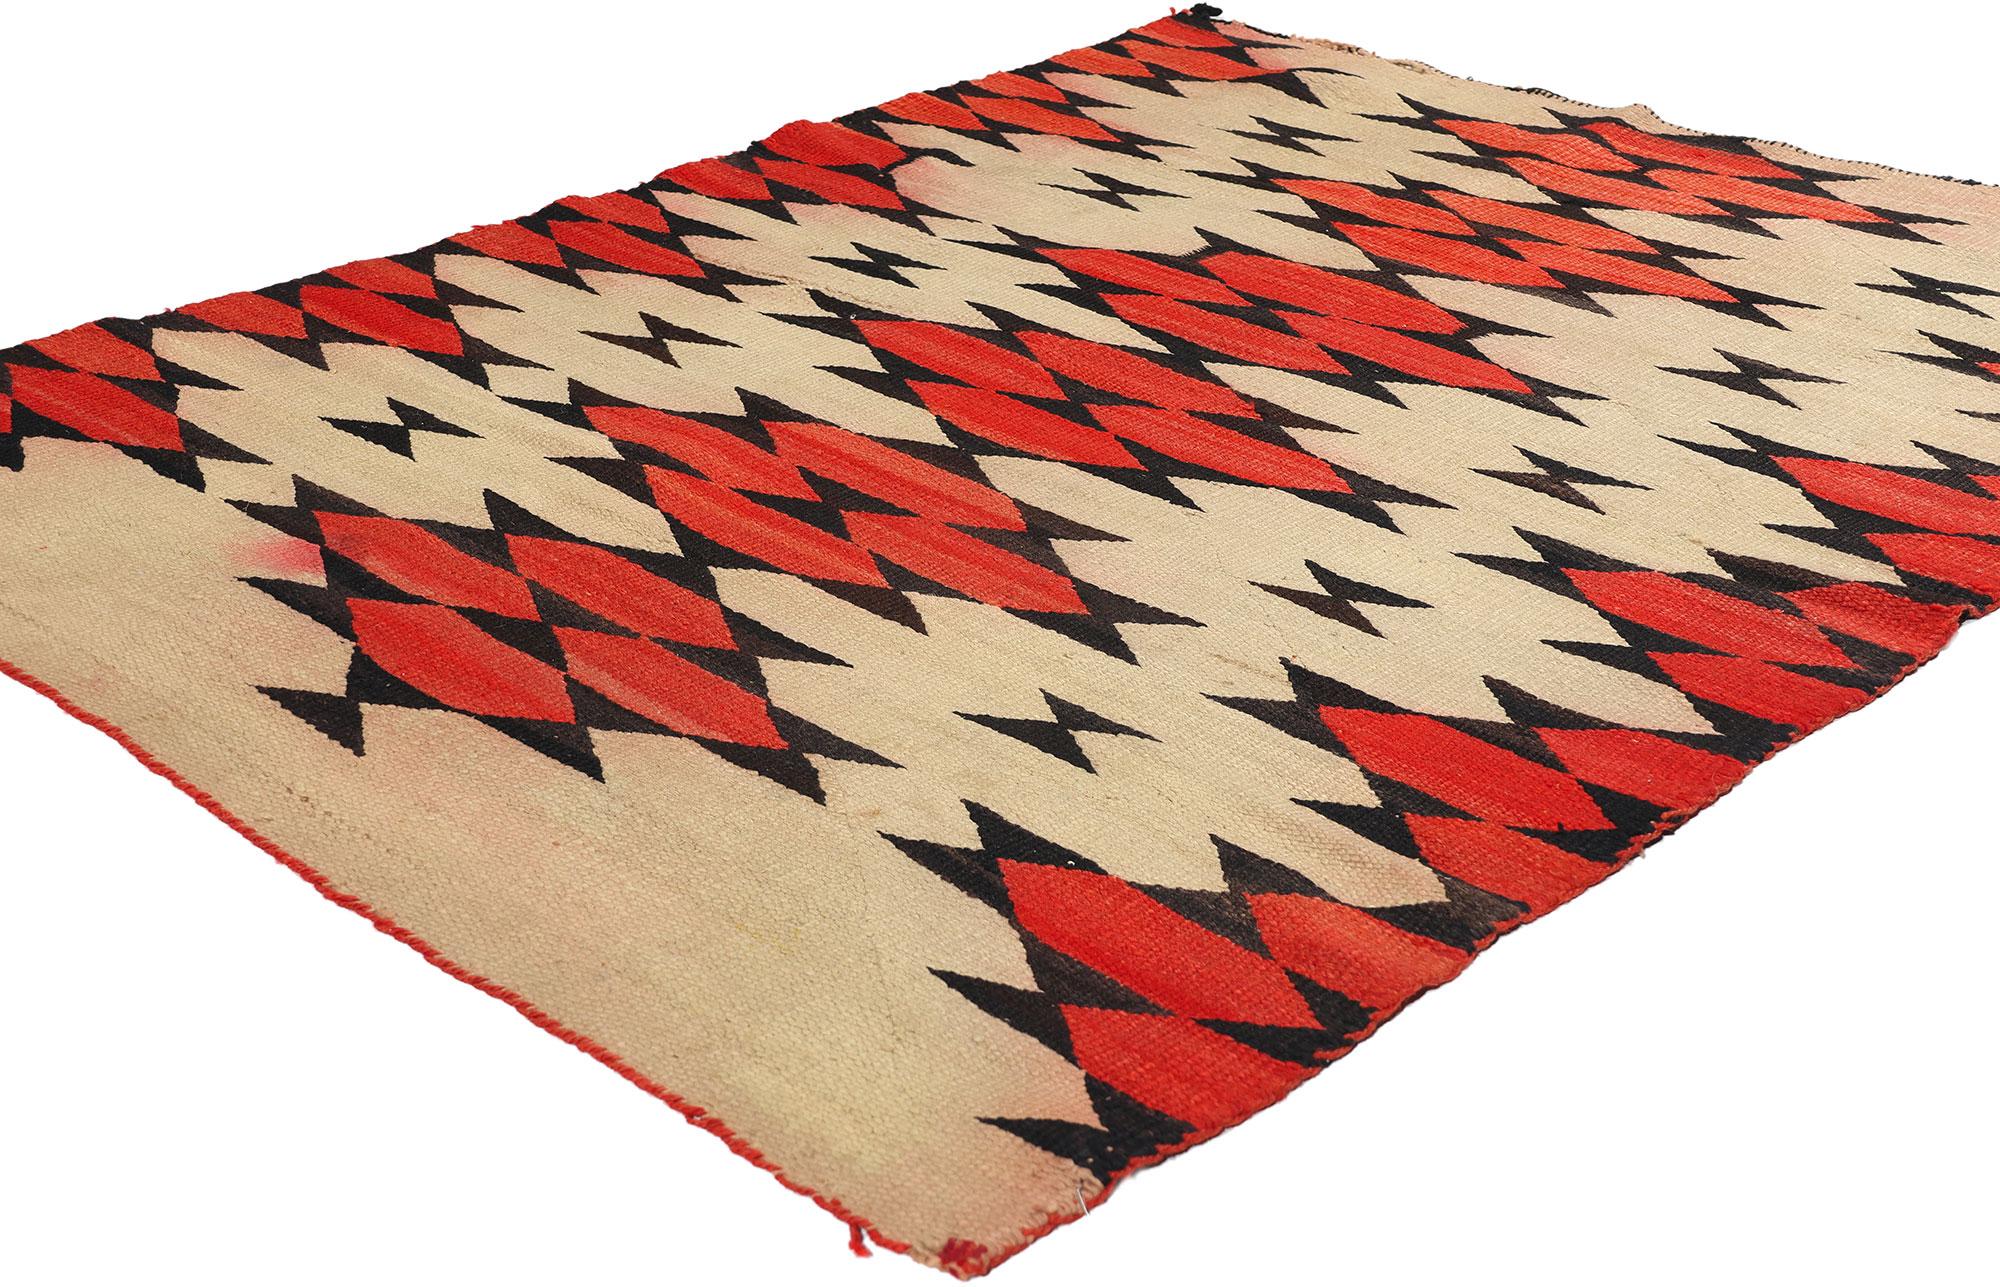 78746 Antique Ganado Navajo Rug, 04'00 x 05'07. Fashioned by skilled Navajo artisans in the Ganado region of northeastern Arizona, Ganado Navajo rugs are meticulously woven with wool sourced from Navajo-Churro sheep indigenous to the area. These